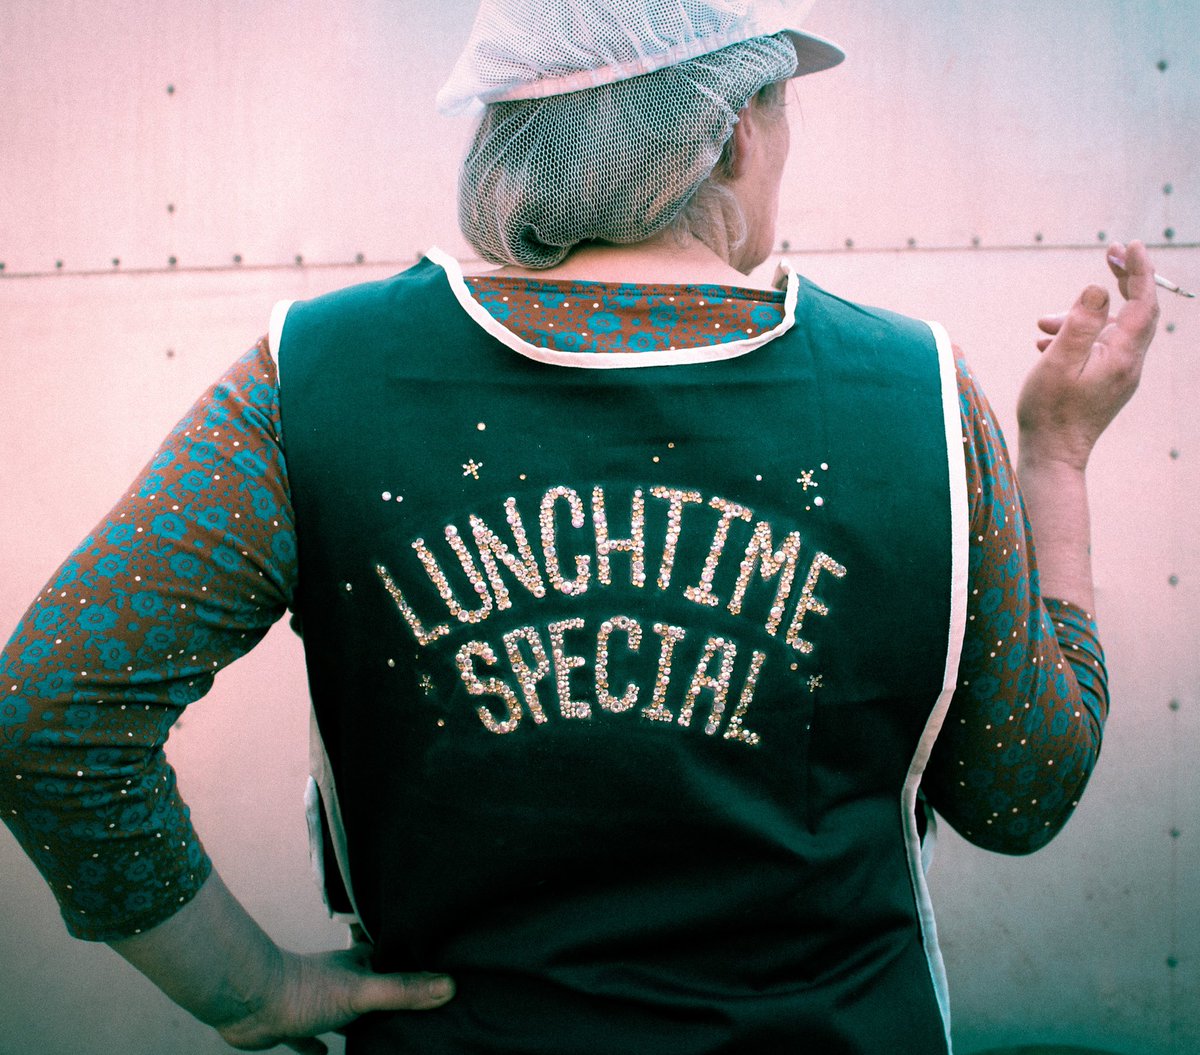 ! @night_chemist release their debut album 'Lunchtime Special' today. Londoners, make sure to get to their album launch at @paperdressed on the 5th July. eventbrite.co.uk/e/the-all-nigh… Listen here open.spotify.com/album/7abWkJ4o… #dadrock #rhinestones #albumrelease #LunchTimespecial